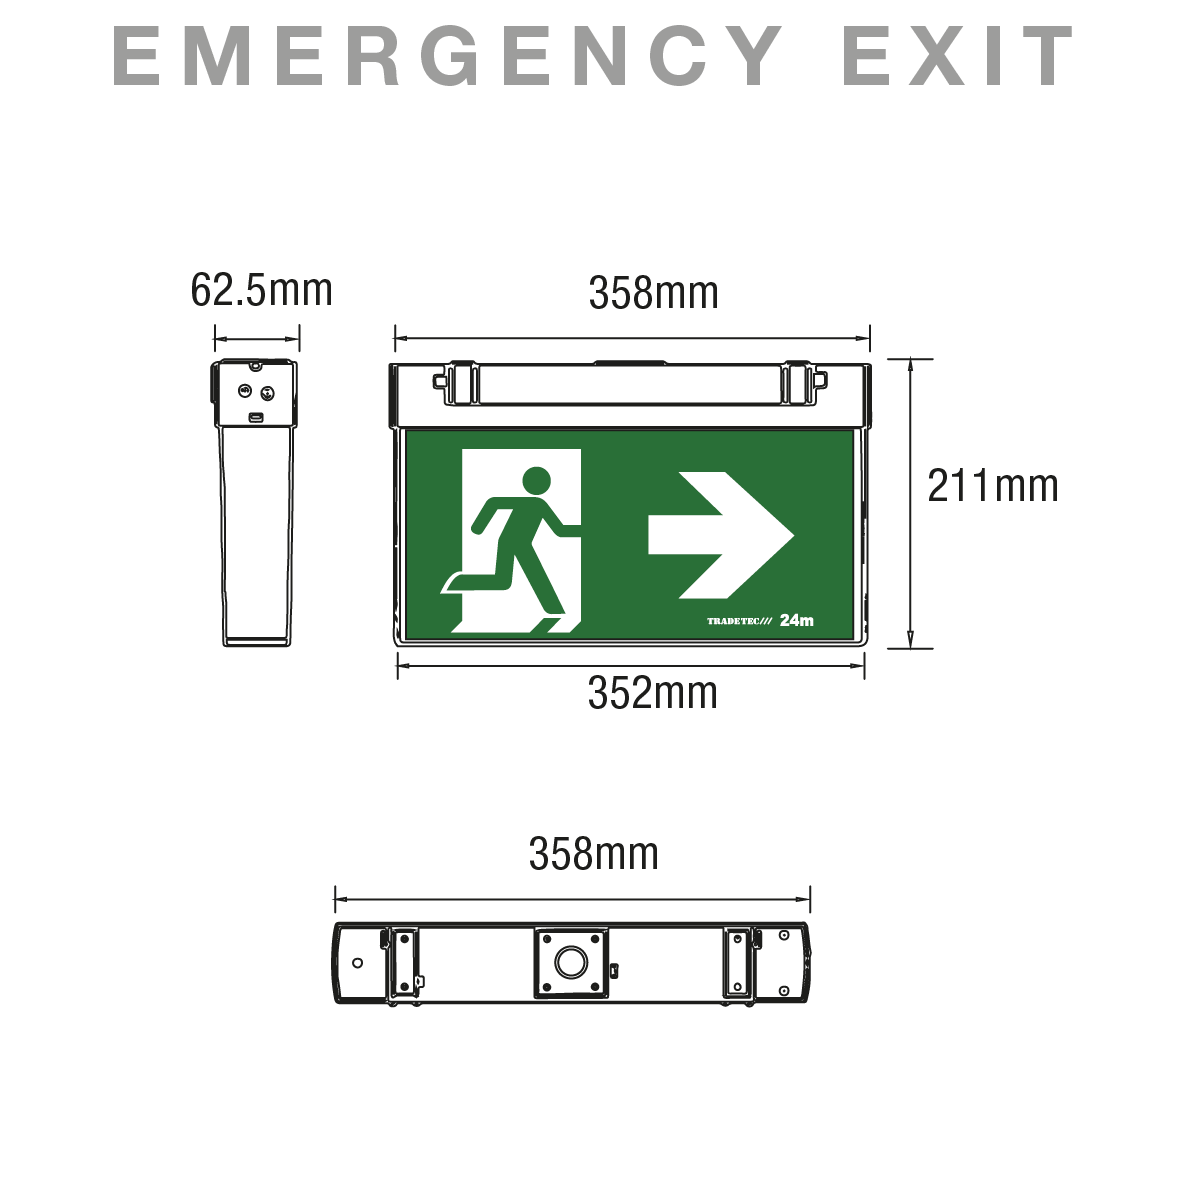 Martec Emergency Exit Ceiling Mount or Recessed